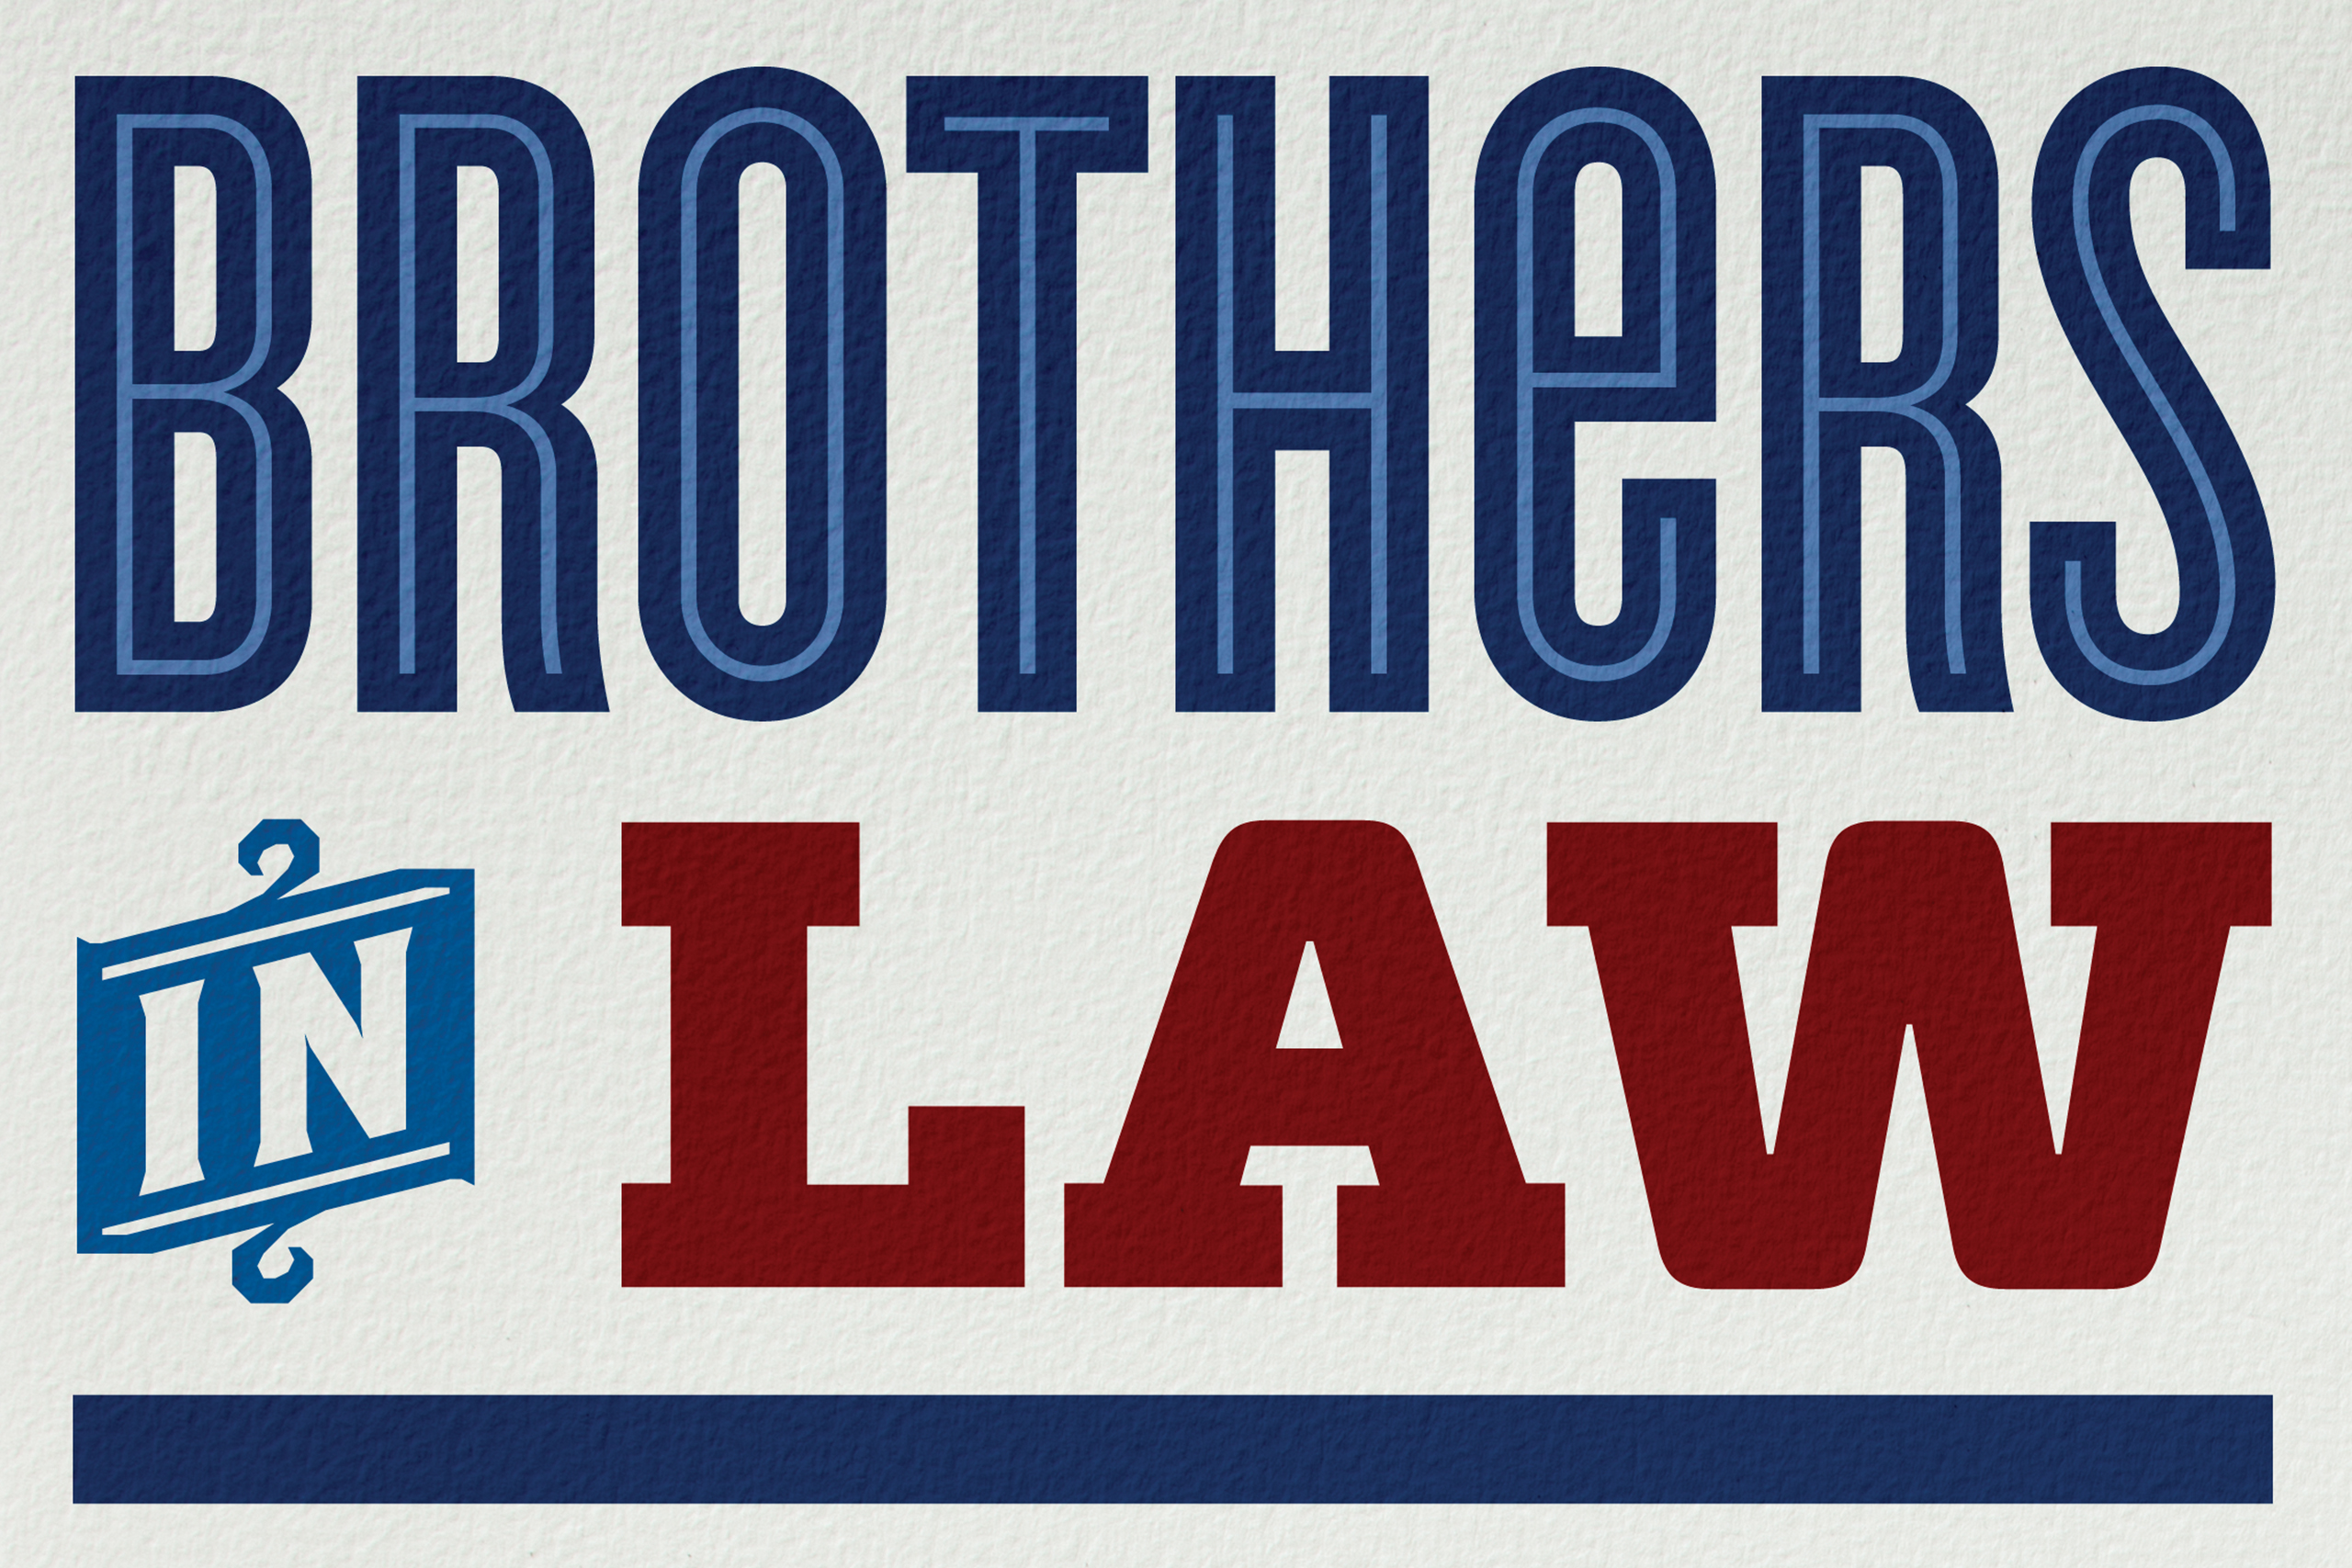 Designed title of the article that reads "Brothers in Law"